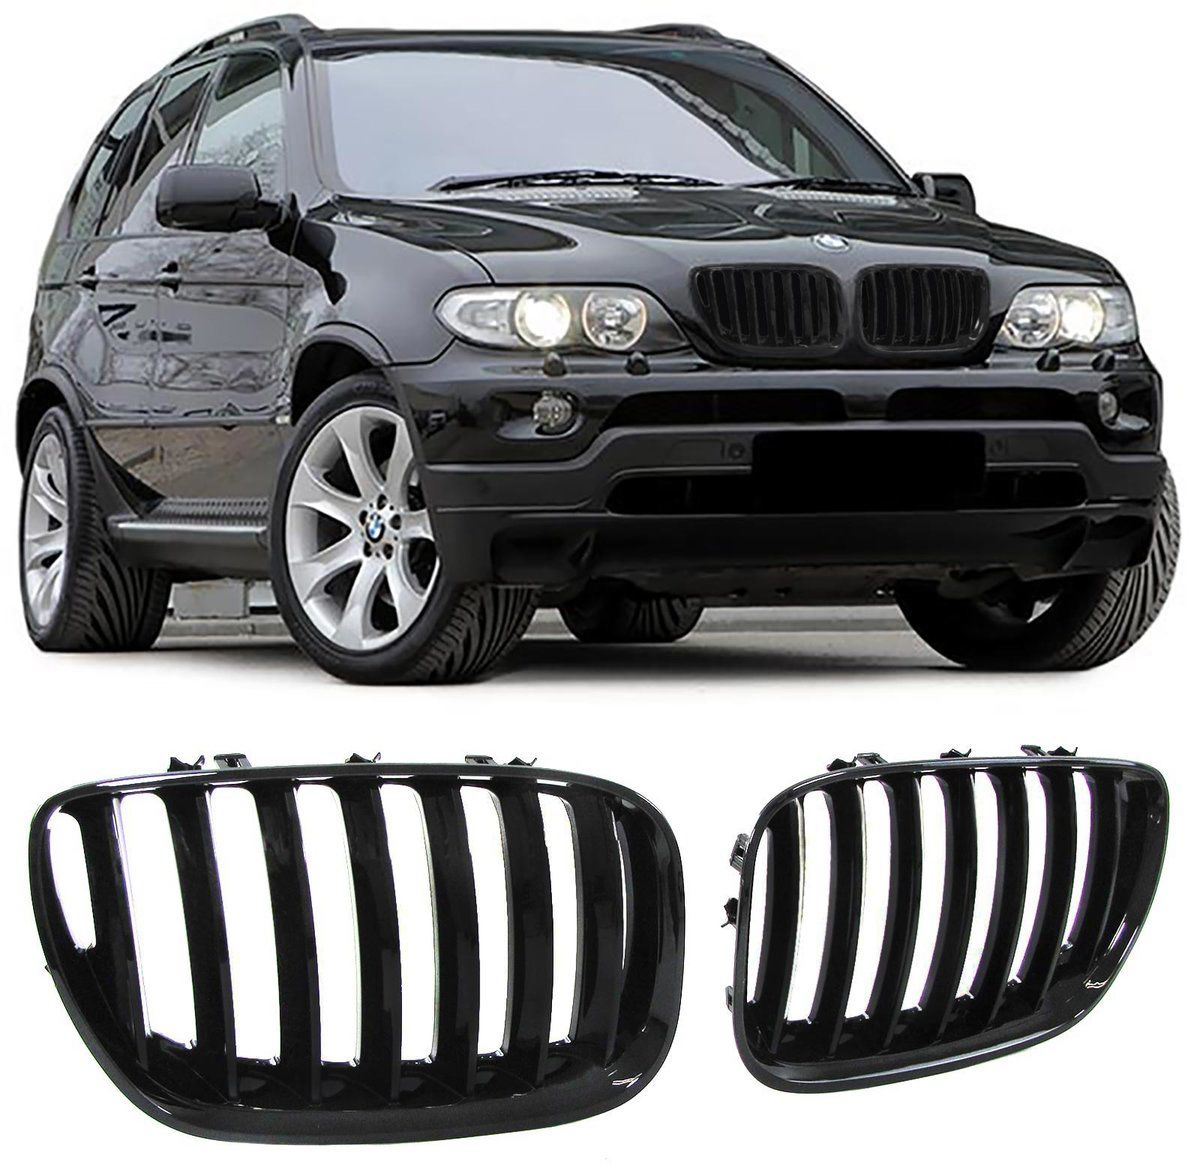 Front black gloss grill for BMW X5 E53 LCI 2003-2006